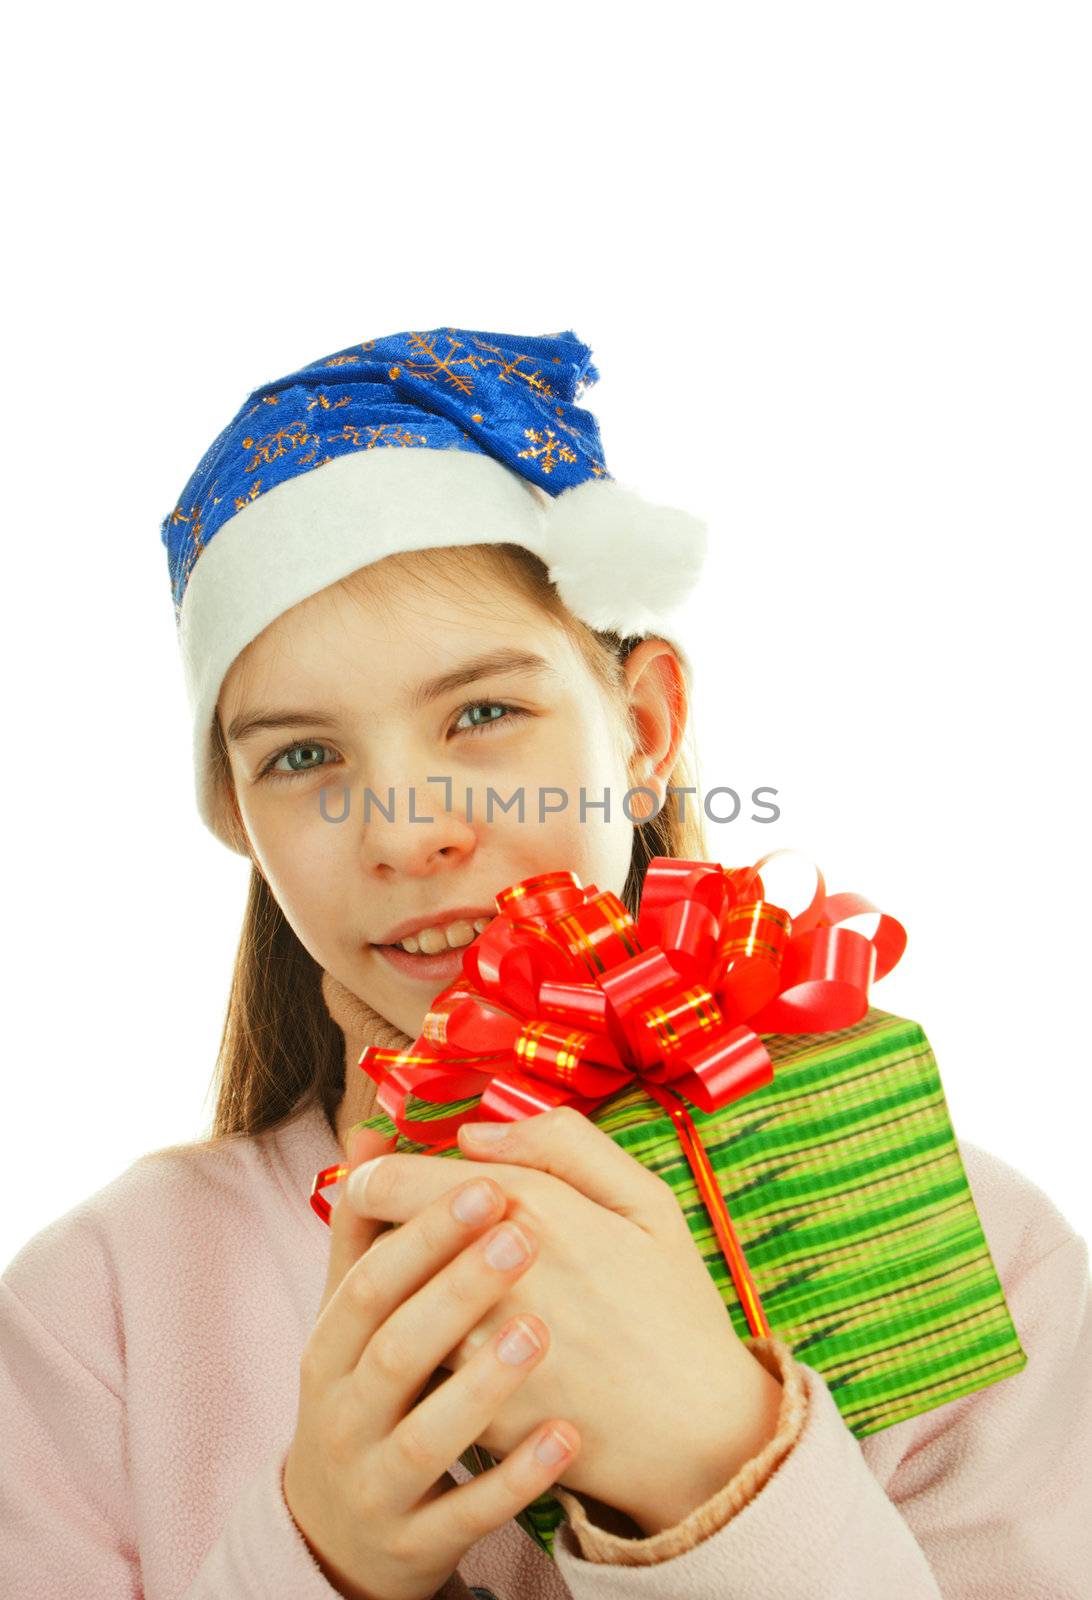 Teen girl wearing Santa hat with a present against white background